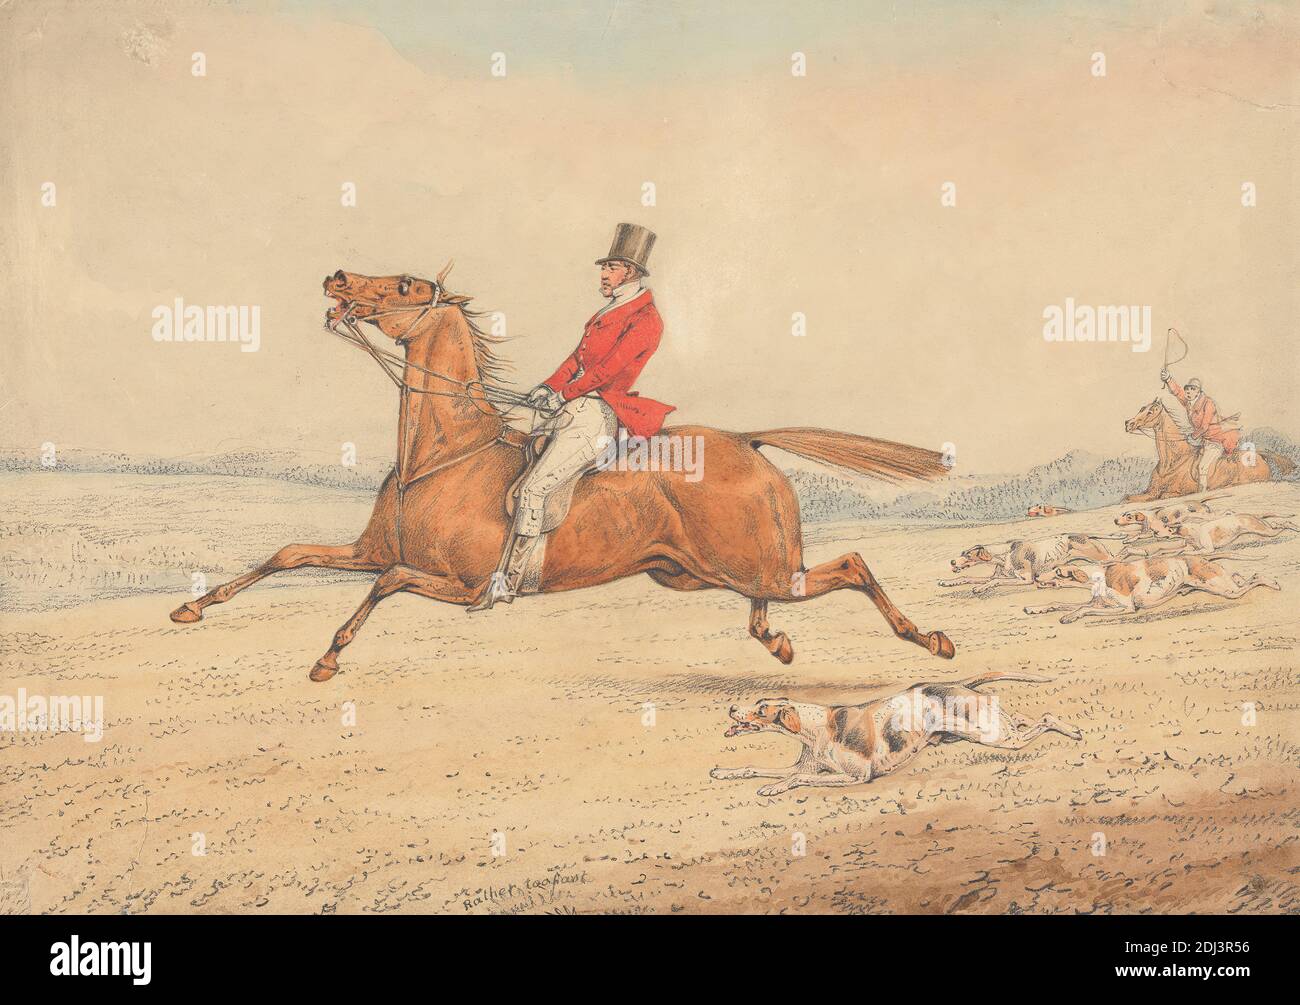 Rather Too Fast', Henry Thomas Alken, 1785–1851, British, undated, Graphite and watercolor on medium, slightly textured, cream, wove paper, Sheet: 9 5/16 × 13 1/4 inches (23.7 × 33.7 cm), dogs (animals), field, galloping, horseback riders, horseback riding, horses (animals), hounds (dogs), hunt, hunters, hunting, landscape, men, sporting art, whip Stock Photo